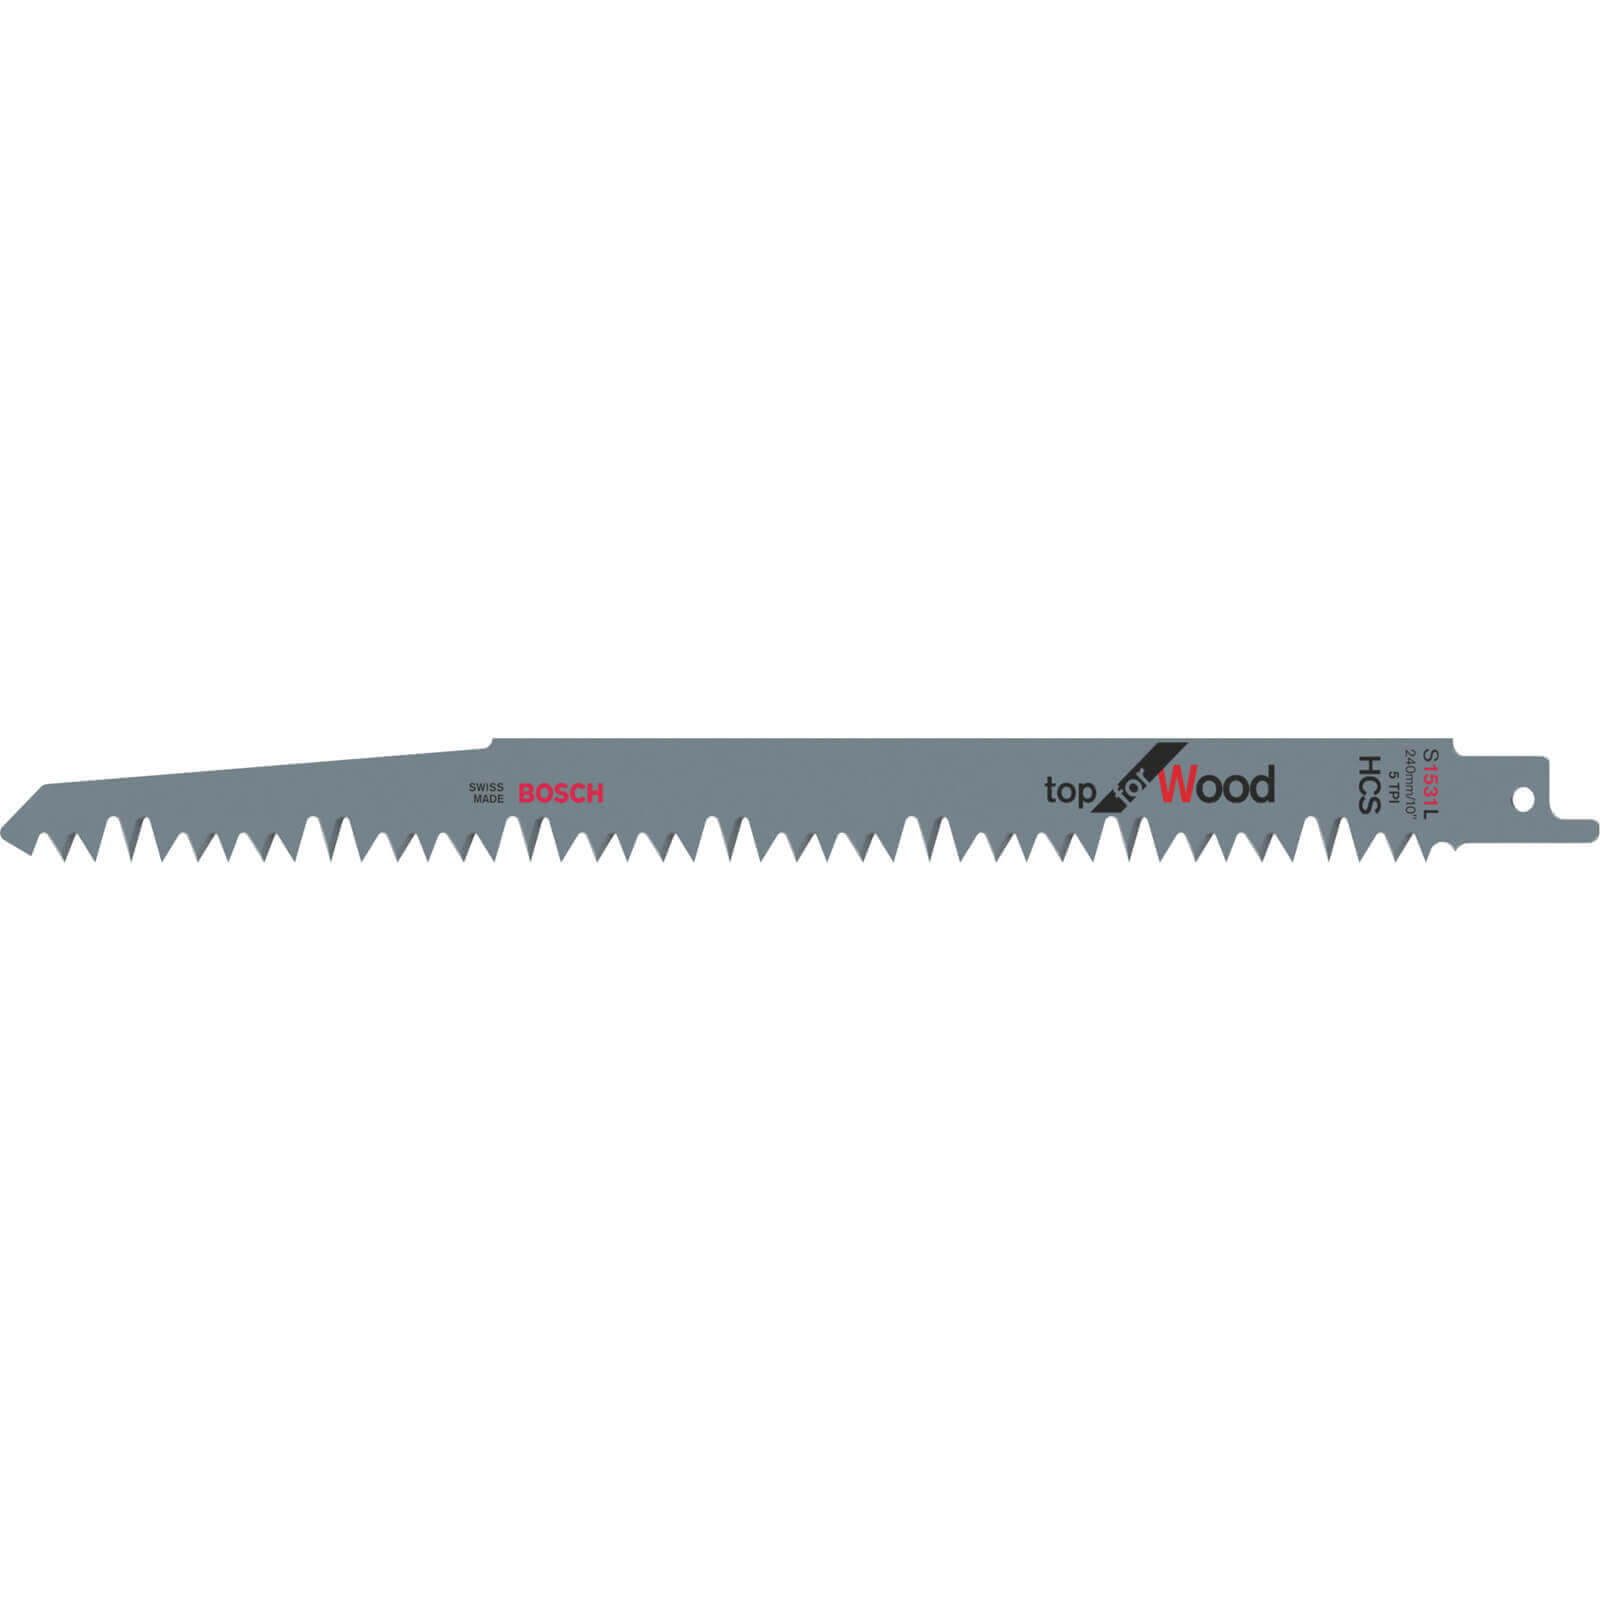 Photo of Bosch S1531l Reciprocating Saw Blades Pack Of 2